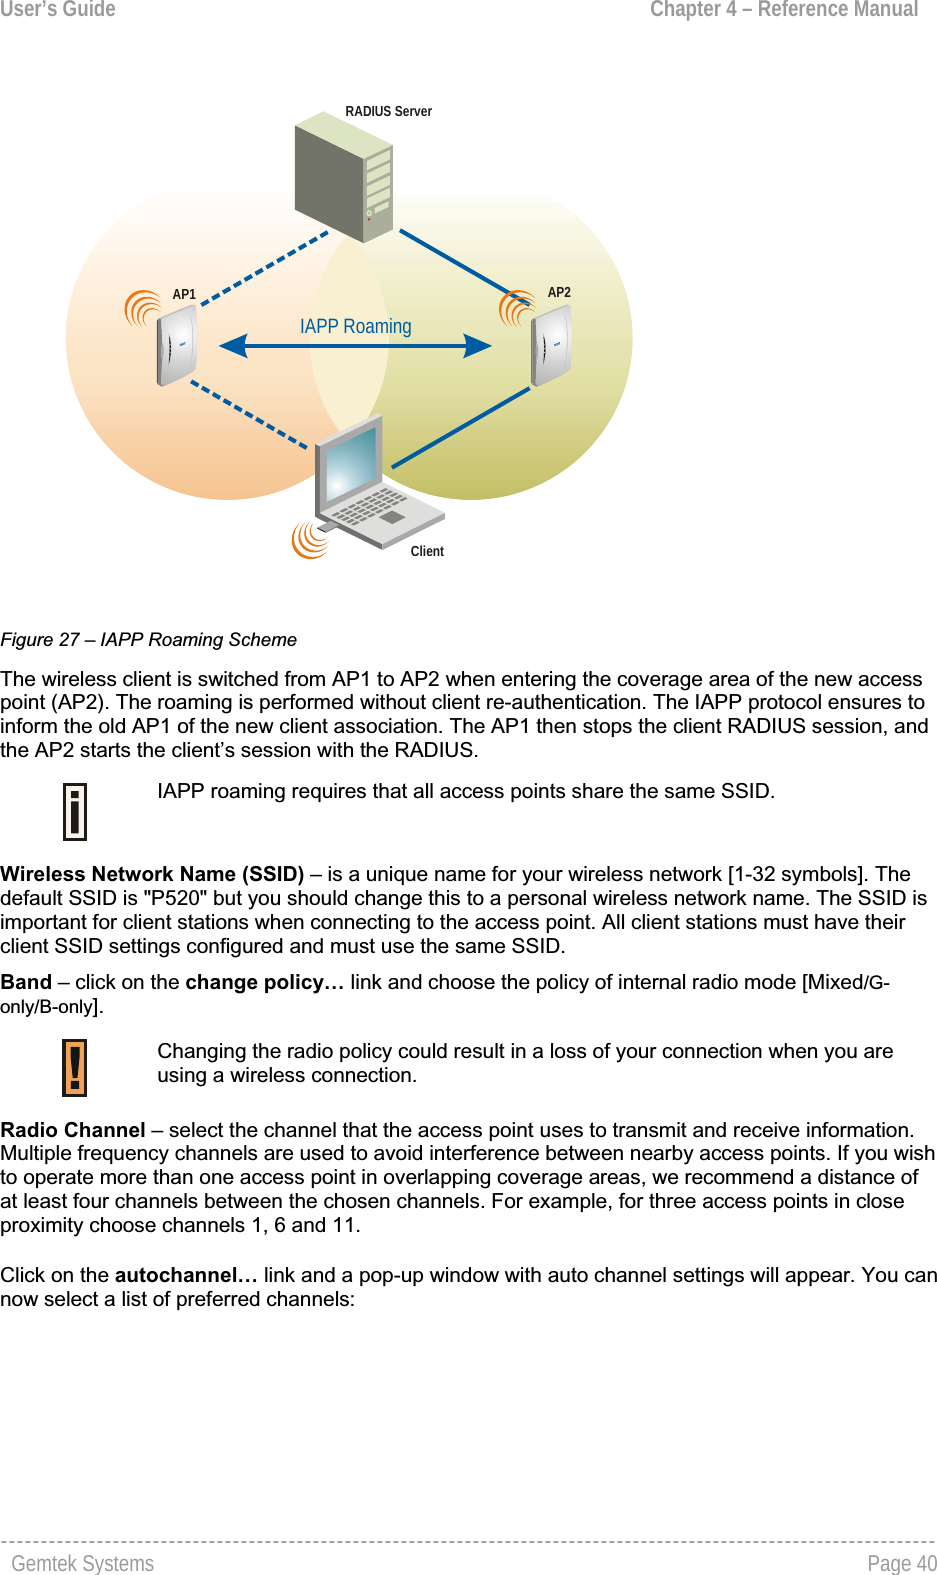 User’s Guide  Chapter 4 – Reference ManualIAPP RoamingAP1 AP2ClientRADIUS ServerFigure 27 – IAPP Roaming SchemeThe wireless client is switched from AP1 to AP2 when entering the coverage area of the new accesspoint (AP2). The roaming is performed without client re-authentication. The IAPP protocol ensures to inform the old AP1 of the new client association. The AP1 then stops the client RADIUS session, and the AP2 starts the client’s session with the RADIUS.IAPP roaming requires that all access points share the same SSID. Wireless Network Name (SSID) – is a unique name for your wireless network [1-32 symbols]. The default SSID is &quot;P520&quot; but you should change this to a personal wireless network name. The SSID is important for client stations when connecting to the access point. All client stations must have their client SSID settings configured and must use the same SSID. Band – click on the change policy… link and choose the policy of internal radio mode [Mixed/G-only/B-only].Changing the radio policy could result in a loss of your connection when you are using a wireless connection.Radio Channel – select the channel that the access point uses to transmit and receive information. Multiple frequency channels are used to avoid interference between nearby access points. If you wish to operate more than one access point in overlapping coverage areas, we recommend a distance of at least four channels between the chosen channels. For example, for three access points in closeproximity choose channels 1, 6 and 11.  Click on the autochannel… link and a pop-up window with auto channel settings will appear. You can now select a list of preferred channels:    Gemtek Systems  Page 40